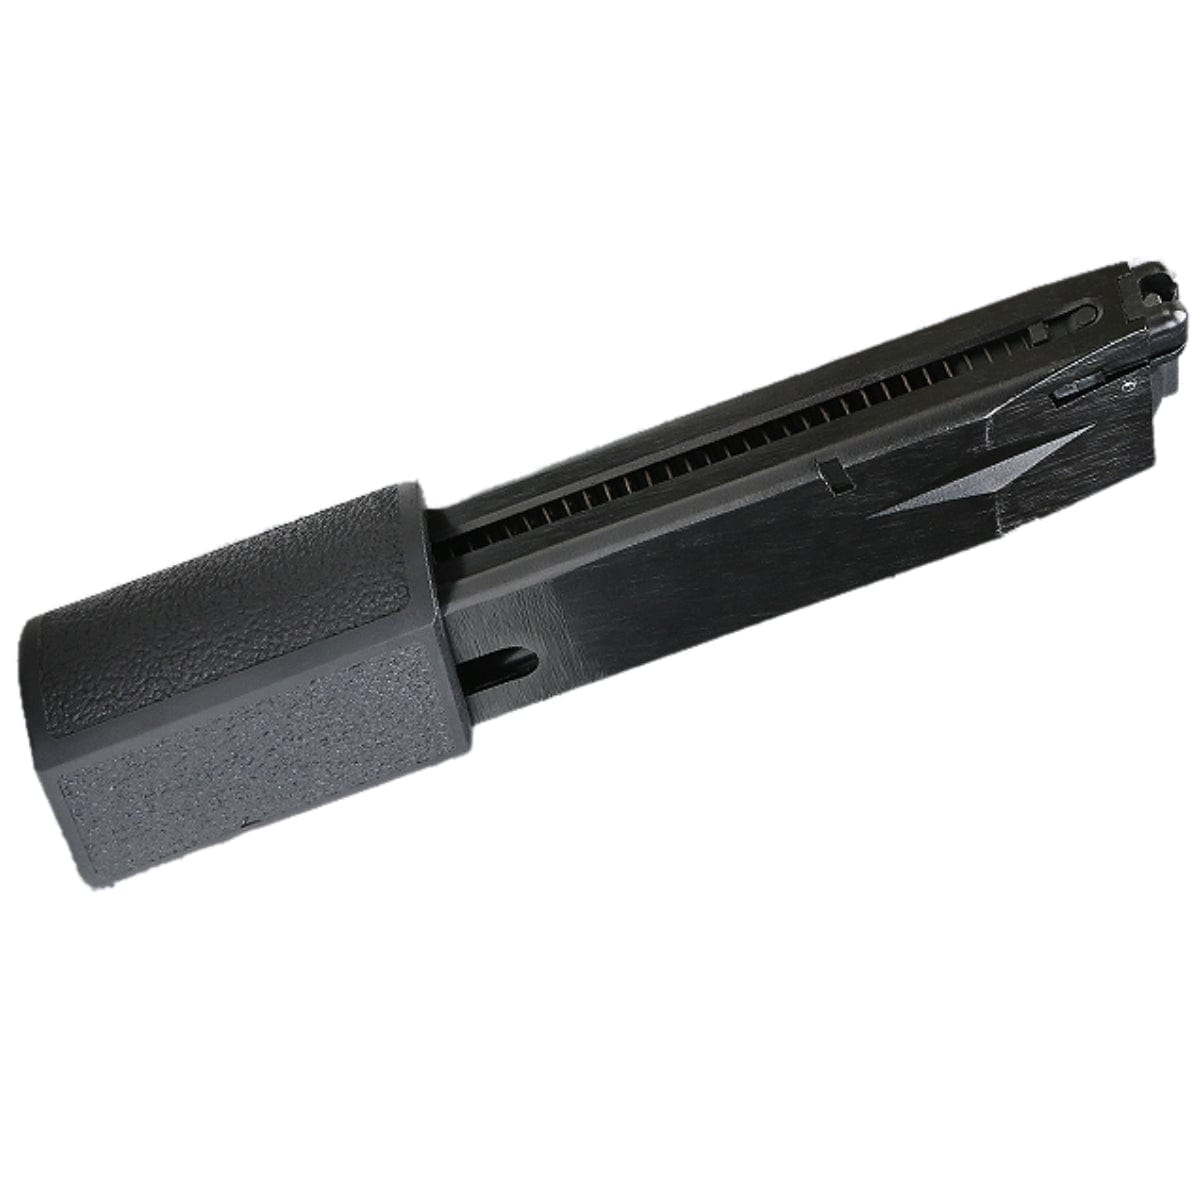 Airsportinggoods SRC SR92 Co2 Extended Magazine 6mm Airsoft 33 Rounds